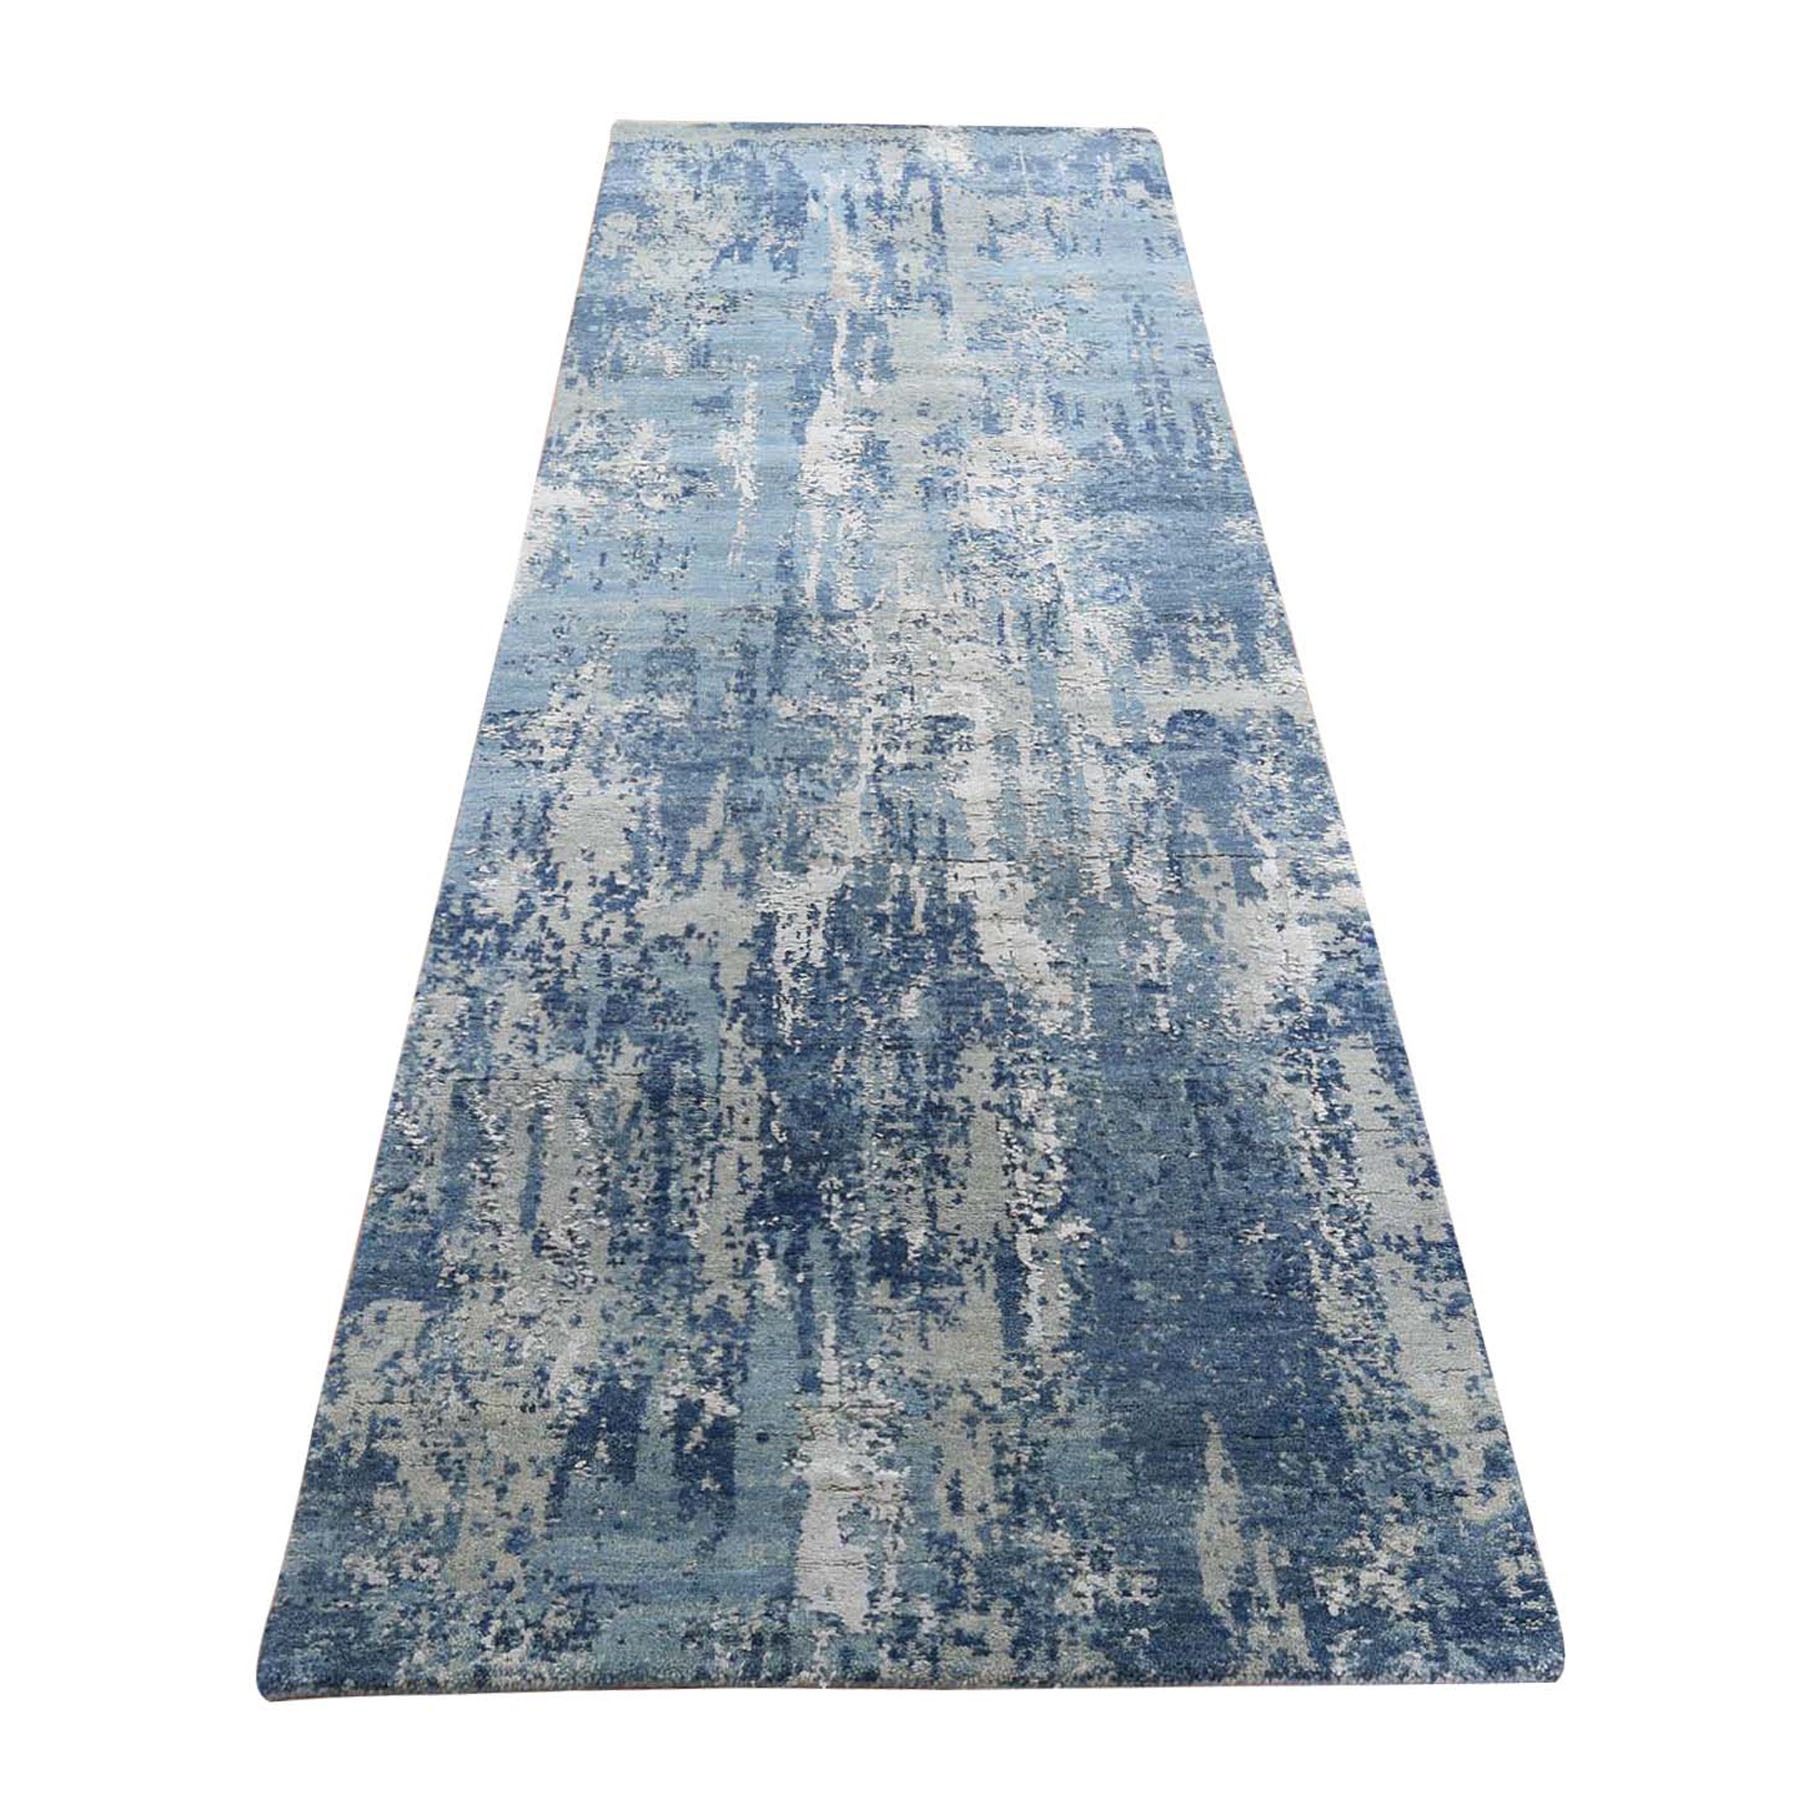 2'6"x8'1" Blue Abstract Design Wool and Pure Silk Hand Woven Oriental Runner Rug 